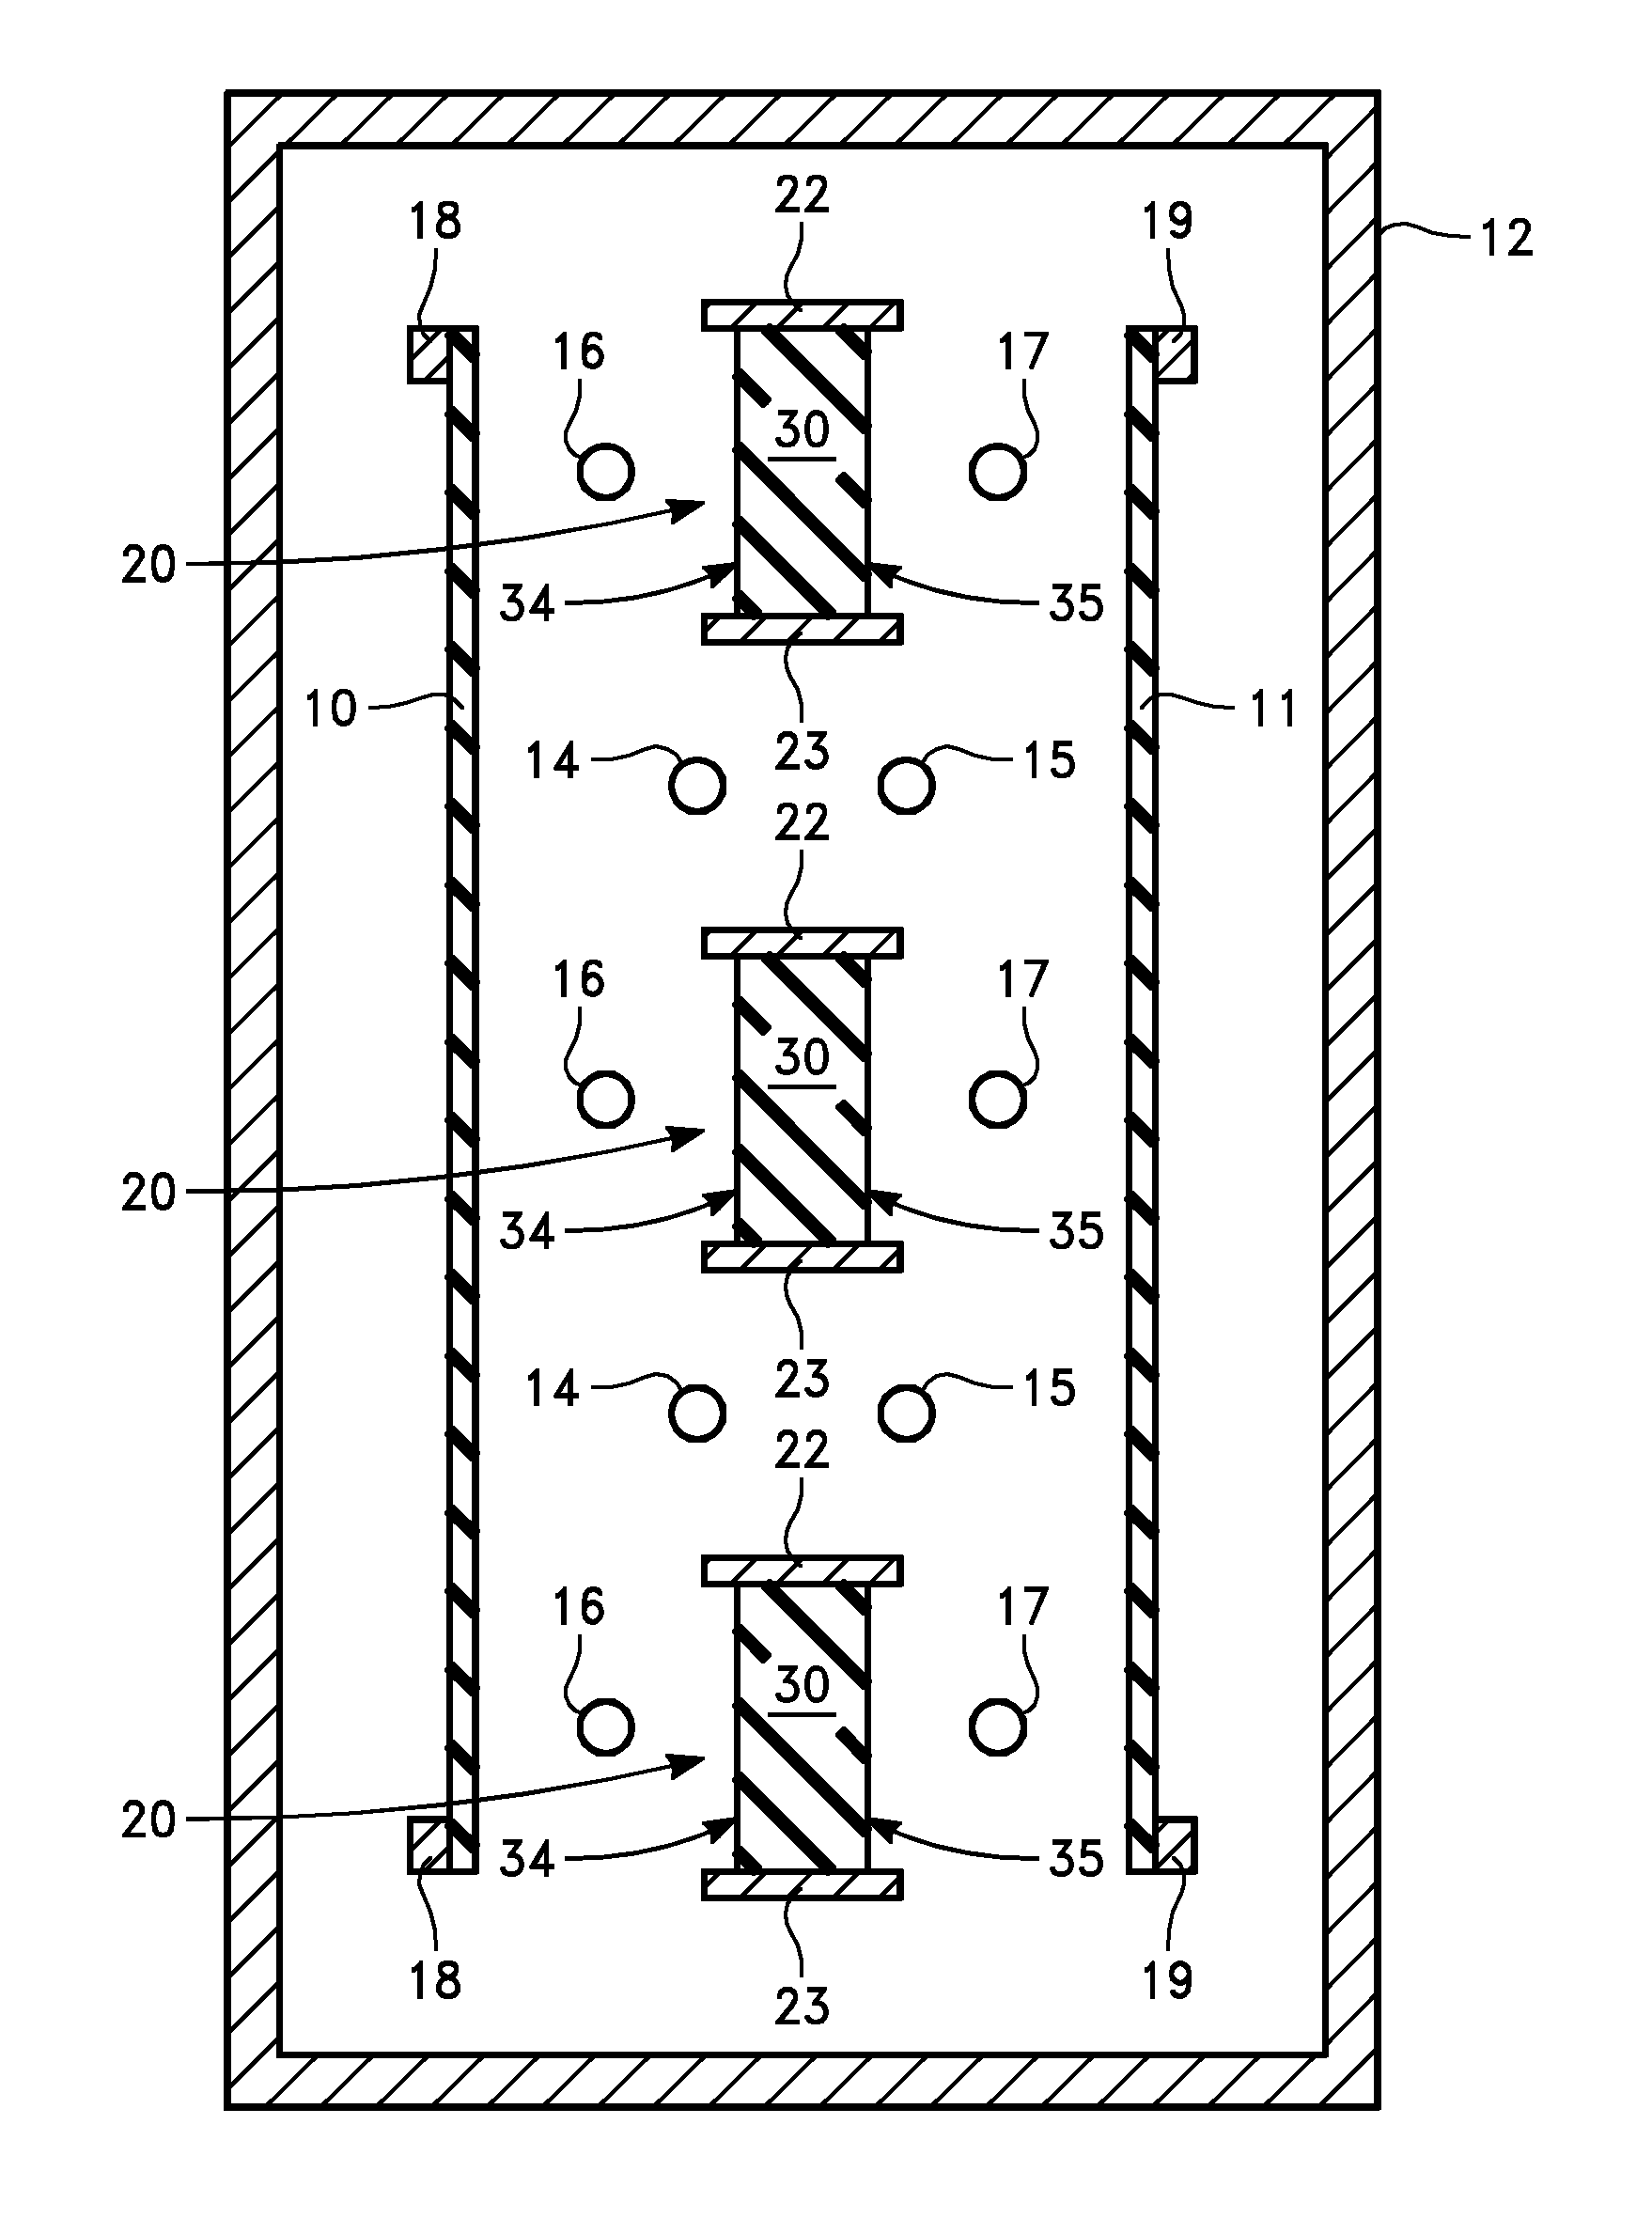 Guided wave applicator with non-gaseous dielectric for plasma chamber